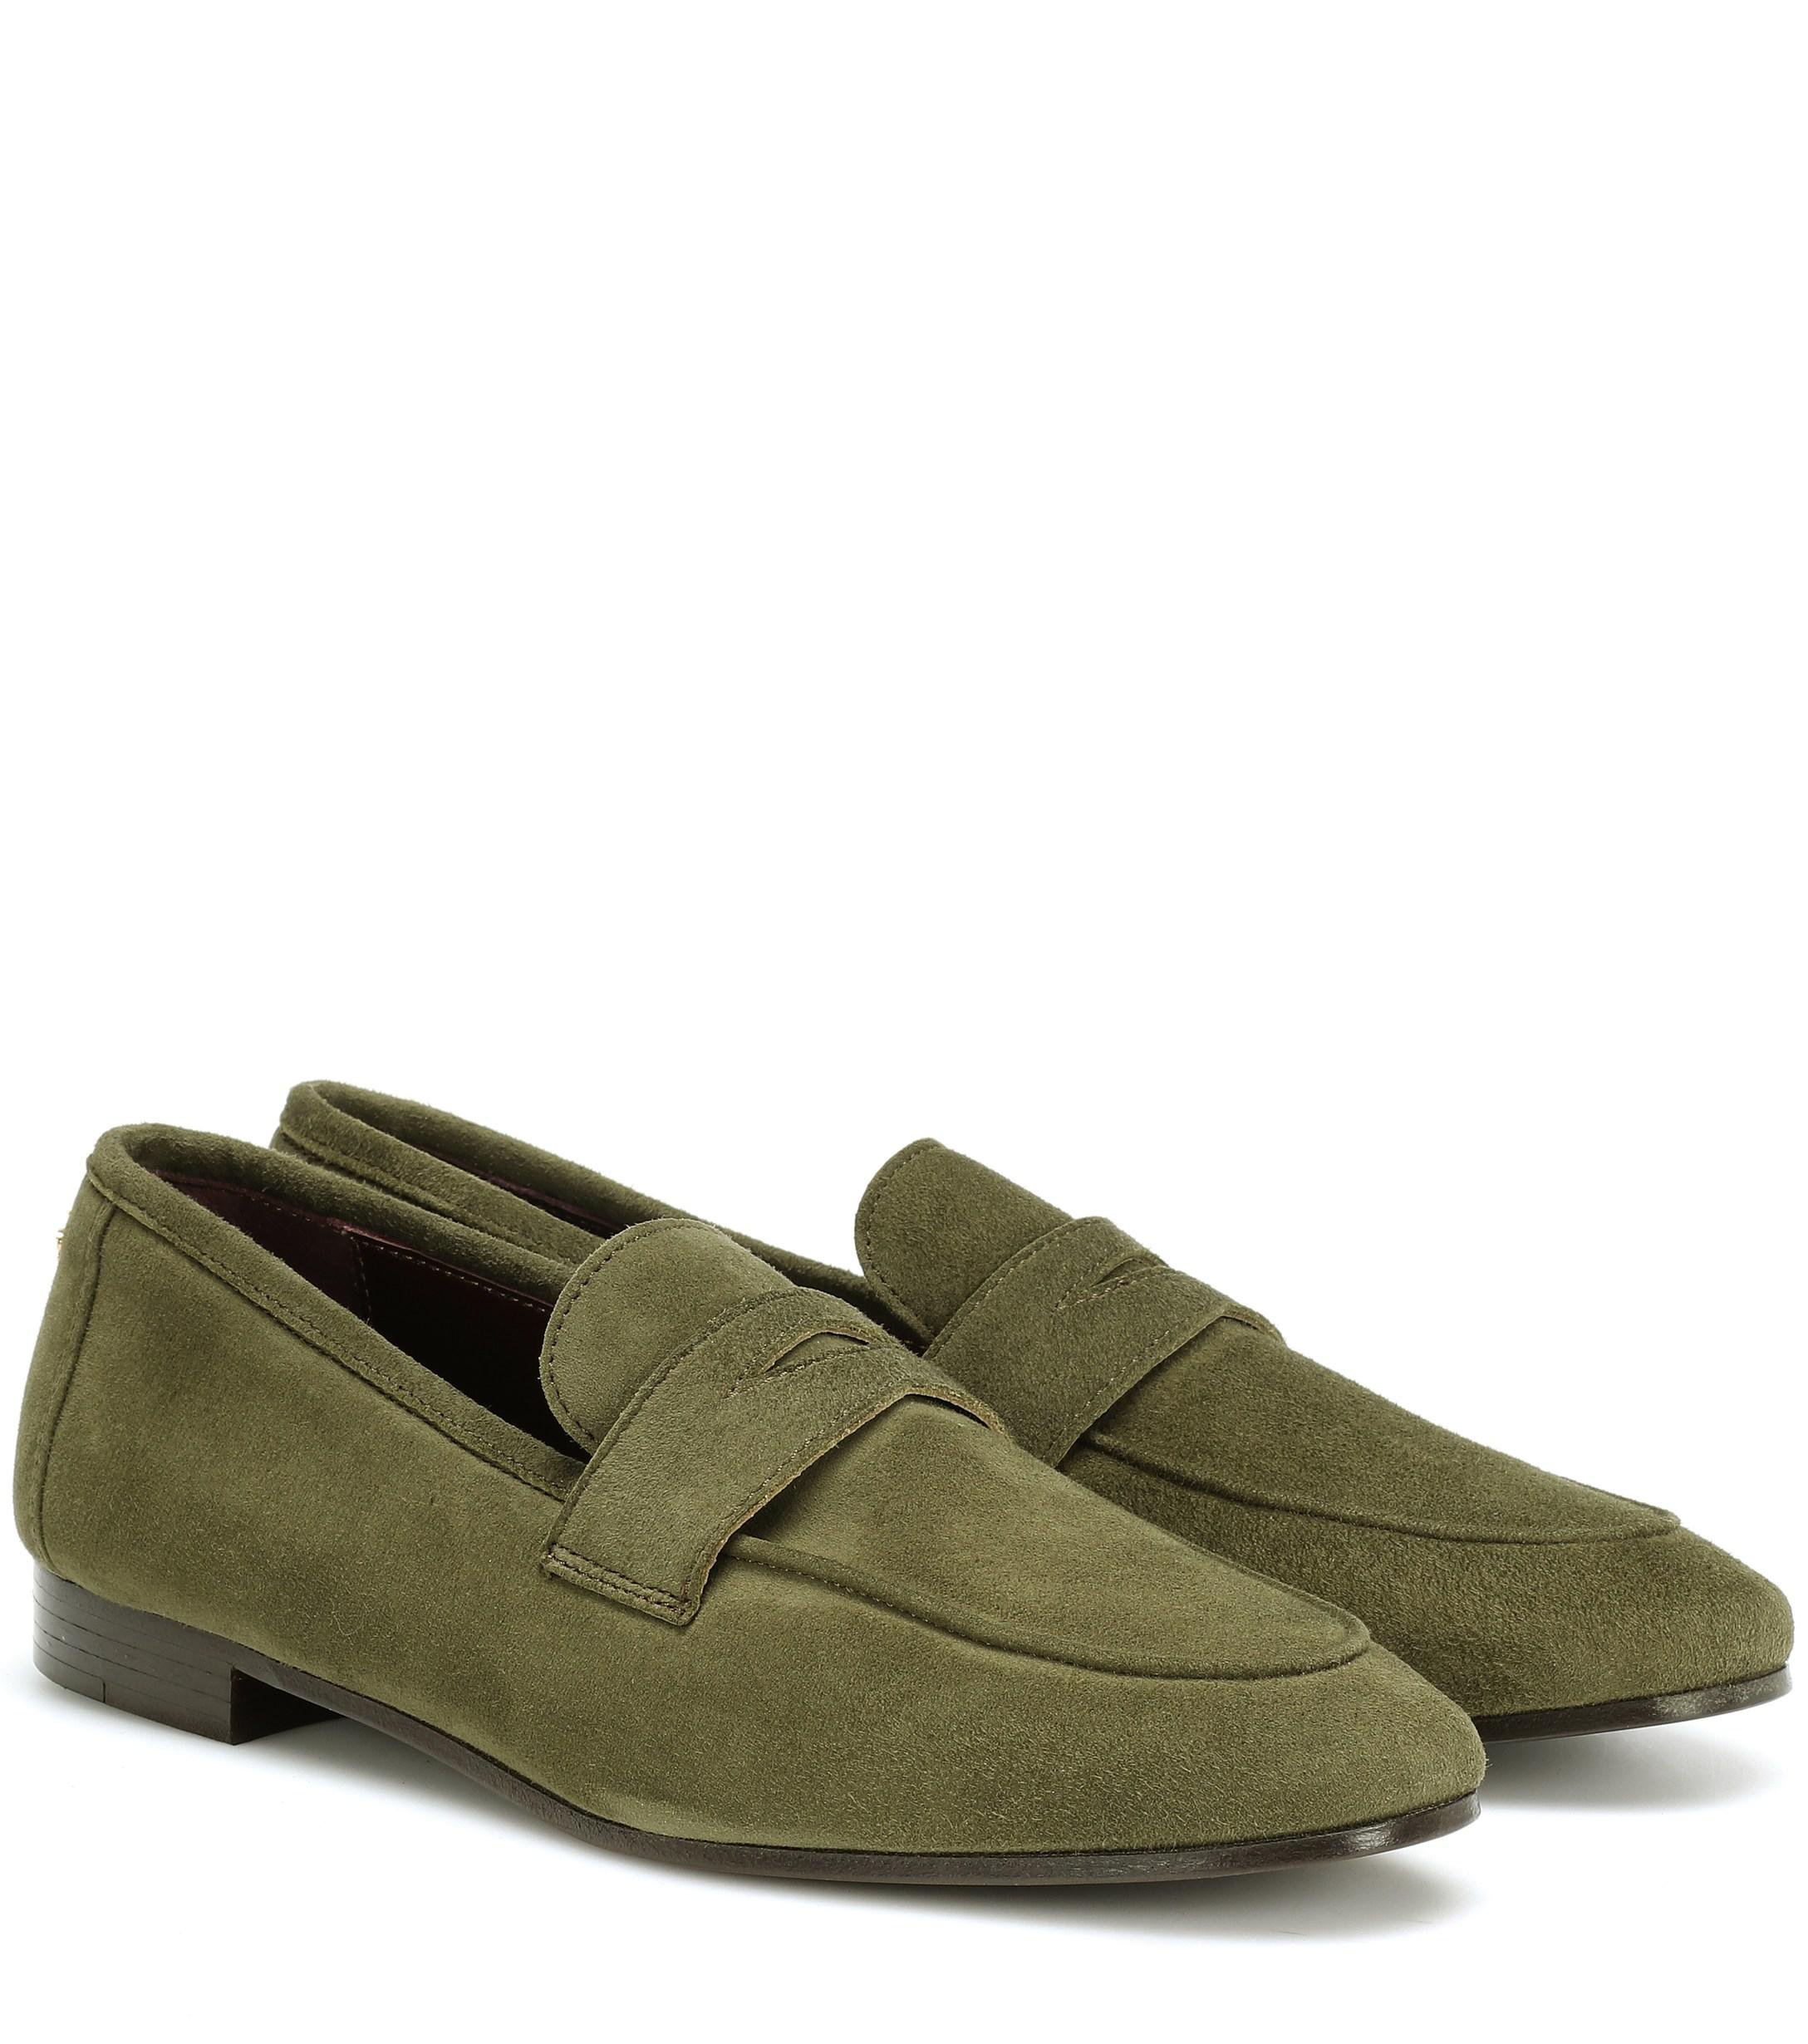 Bougeotte Flaneur Suede Loafers in Khaki Green (Green) - Lyst